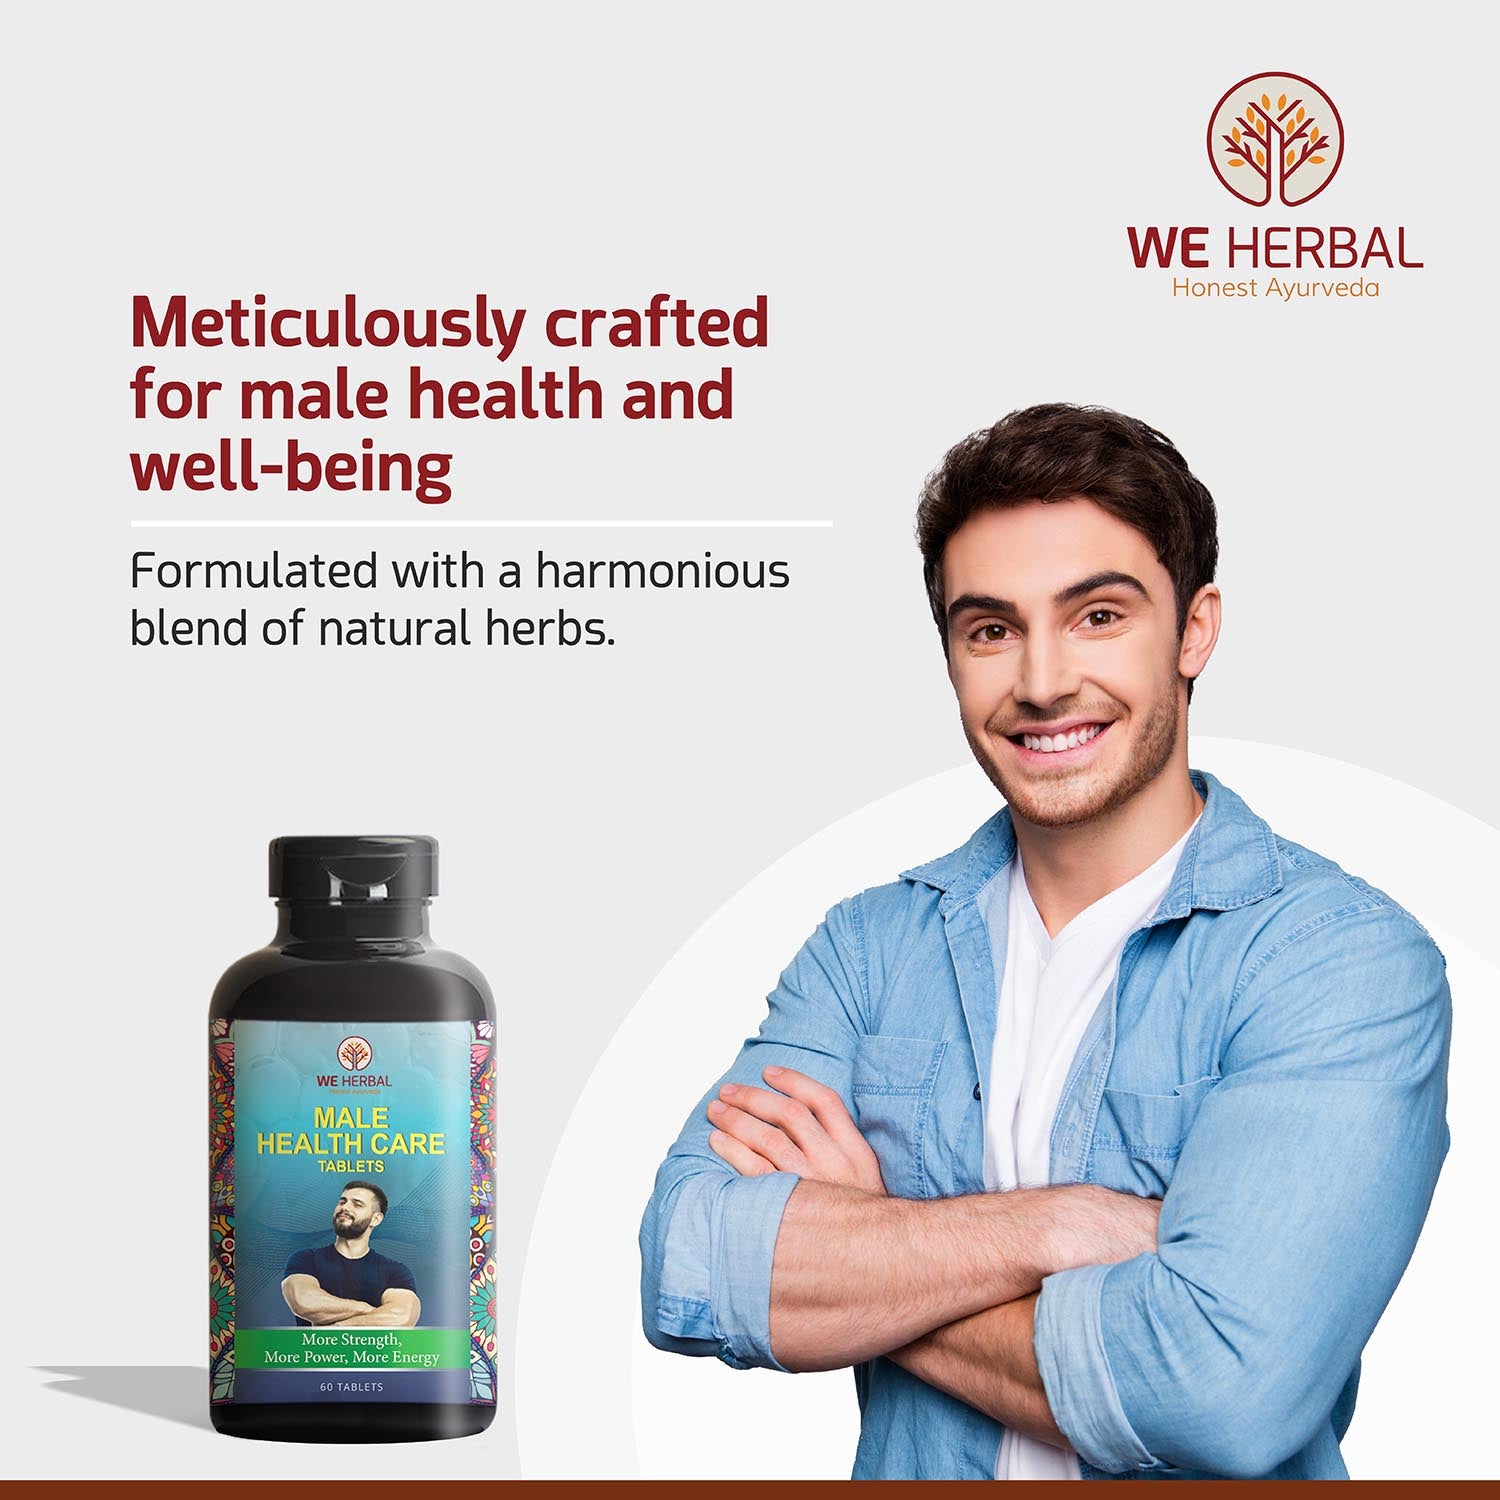 Male Health Care Tablets We Herbal | Back to the Nature